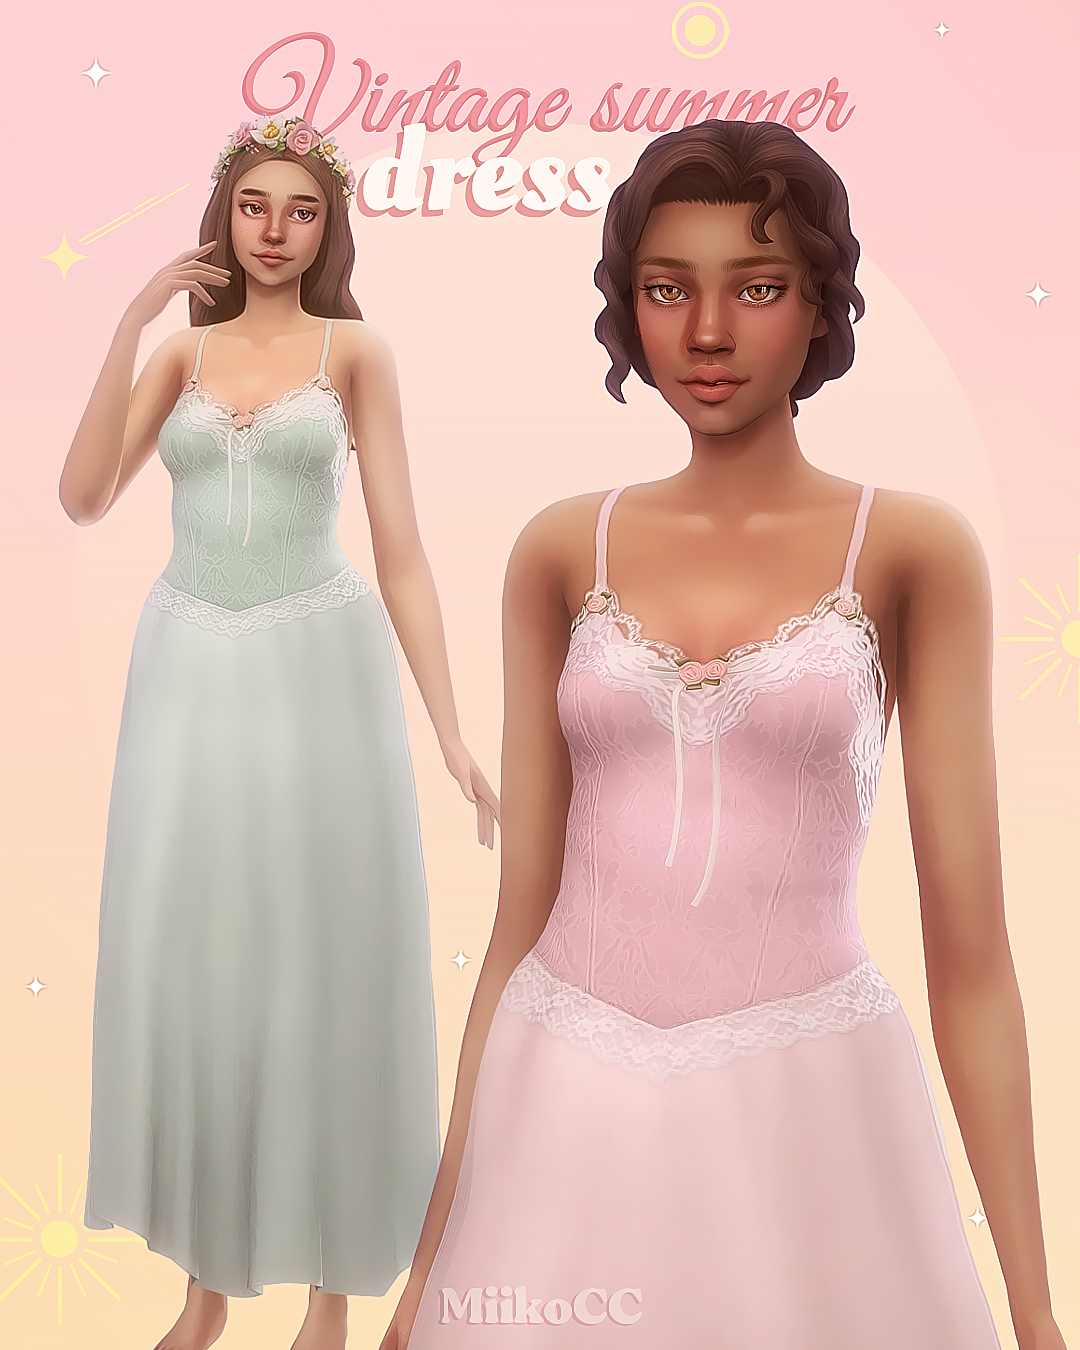 Classic String Lace Brassiere - The Sims 4 Create a Sim - CurseForge